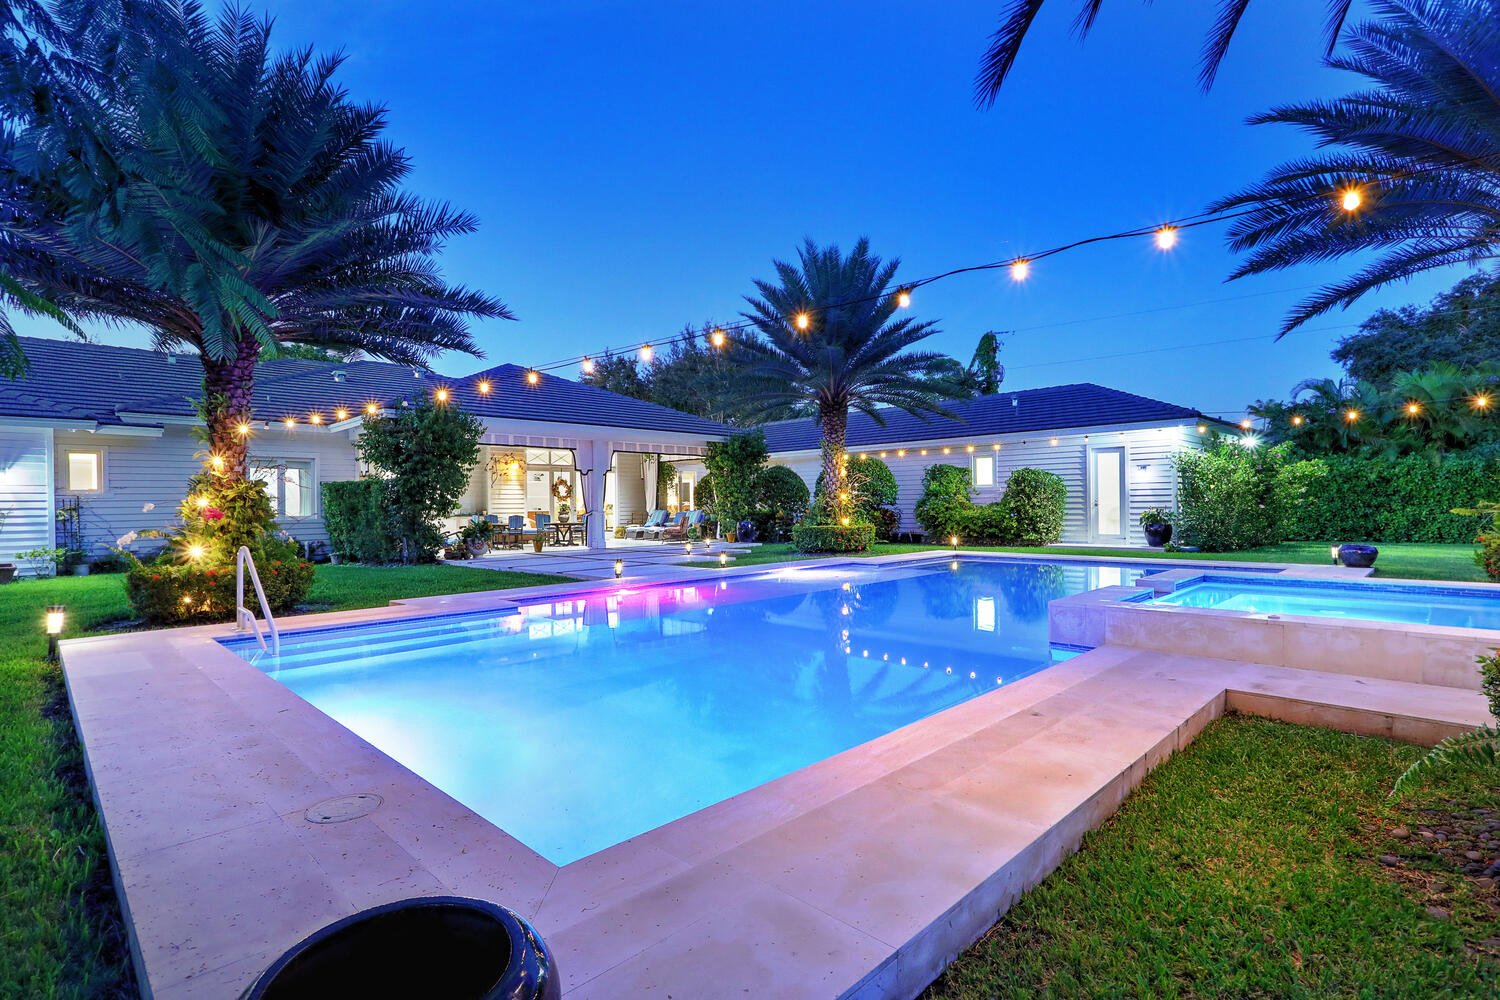 Master Brokers Forum Listing: Check Out This 'Hamptons Meets Key West' Style North Pinecrest Home Asking $5.8 Million 24.jpg